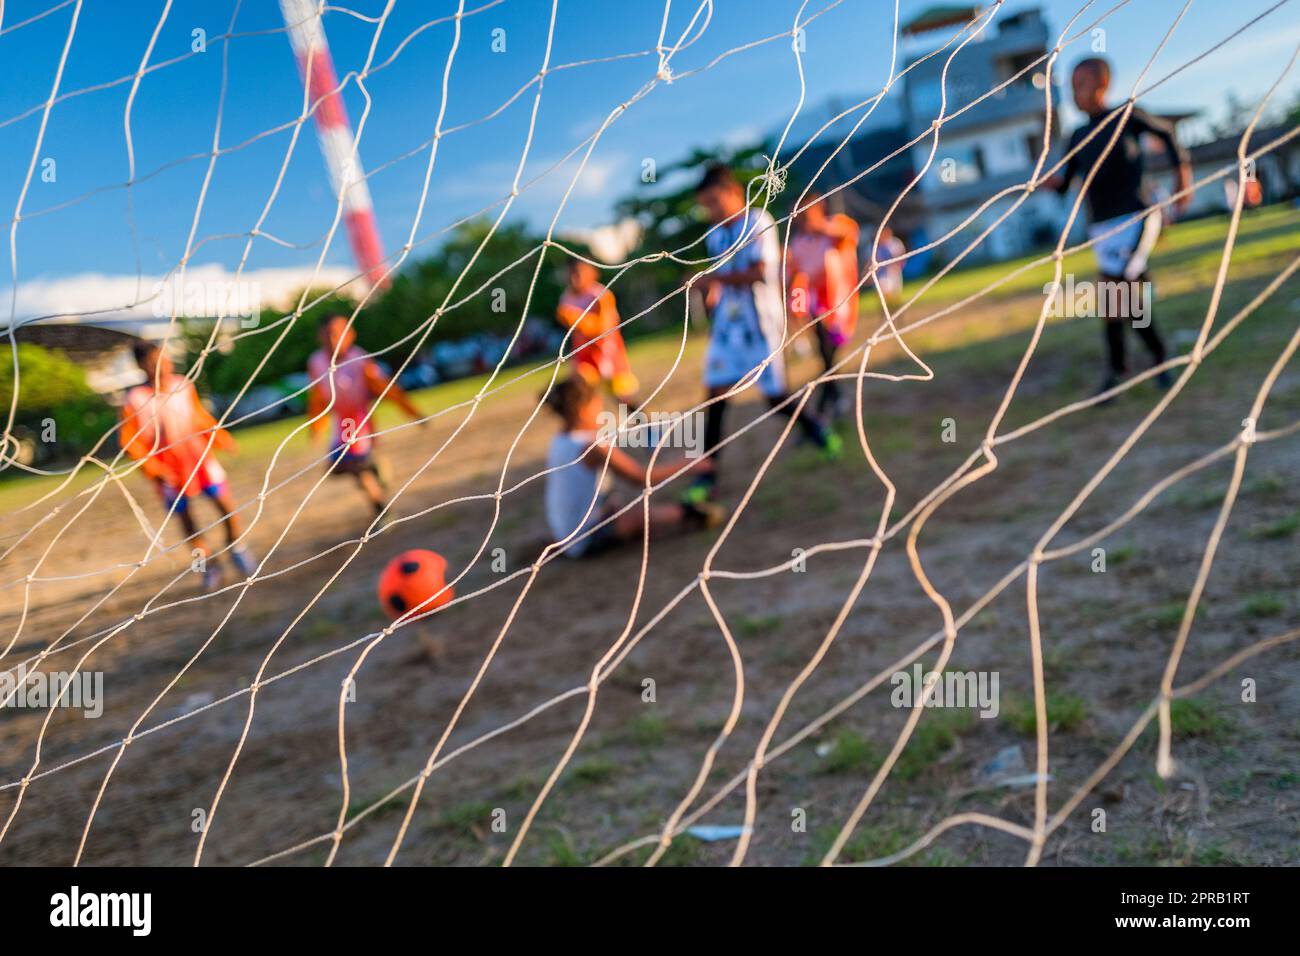 A young Afro-Colombian football player scores the goal during a training session in Necoclí, Antioquia, Colombia. Stock Photo